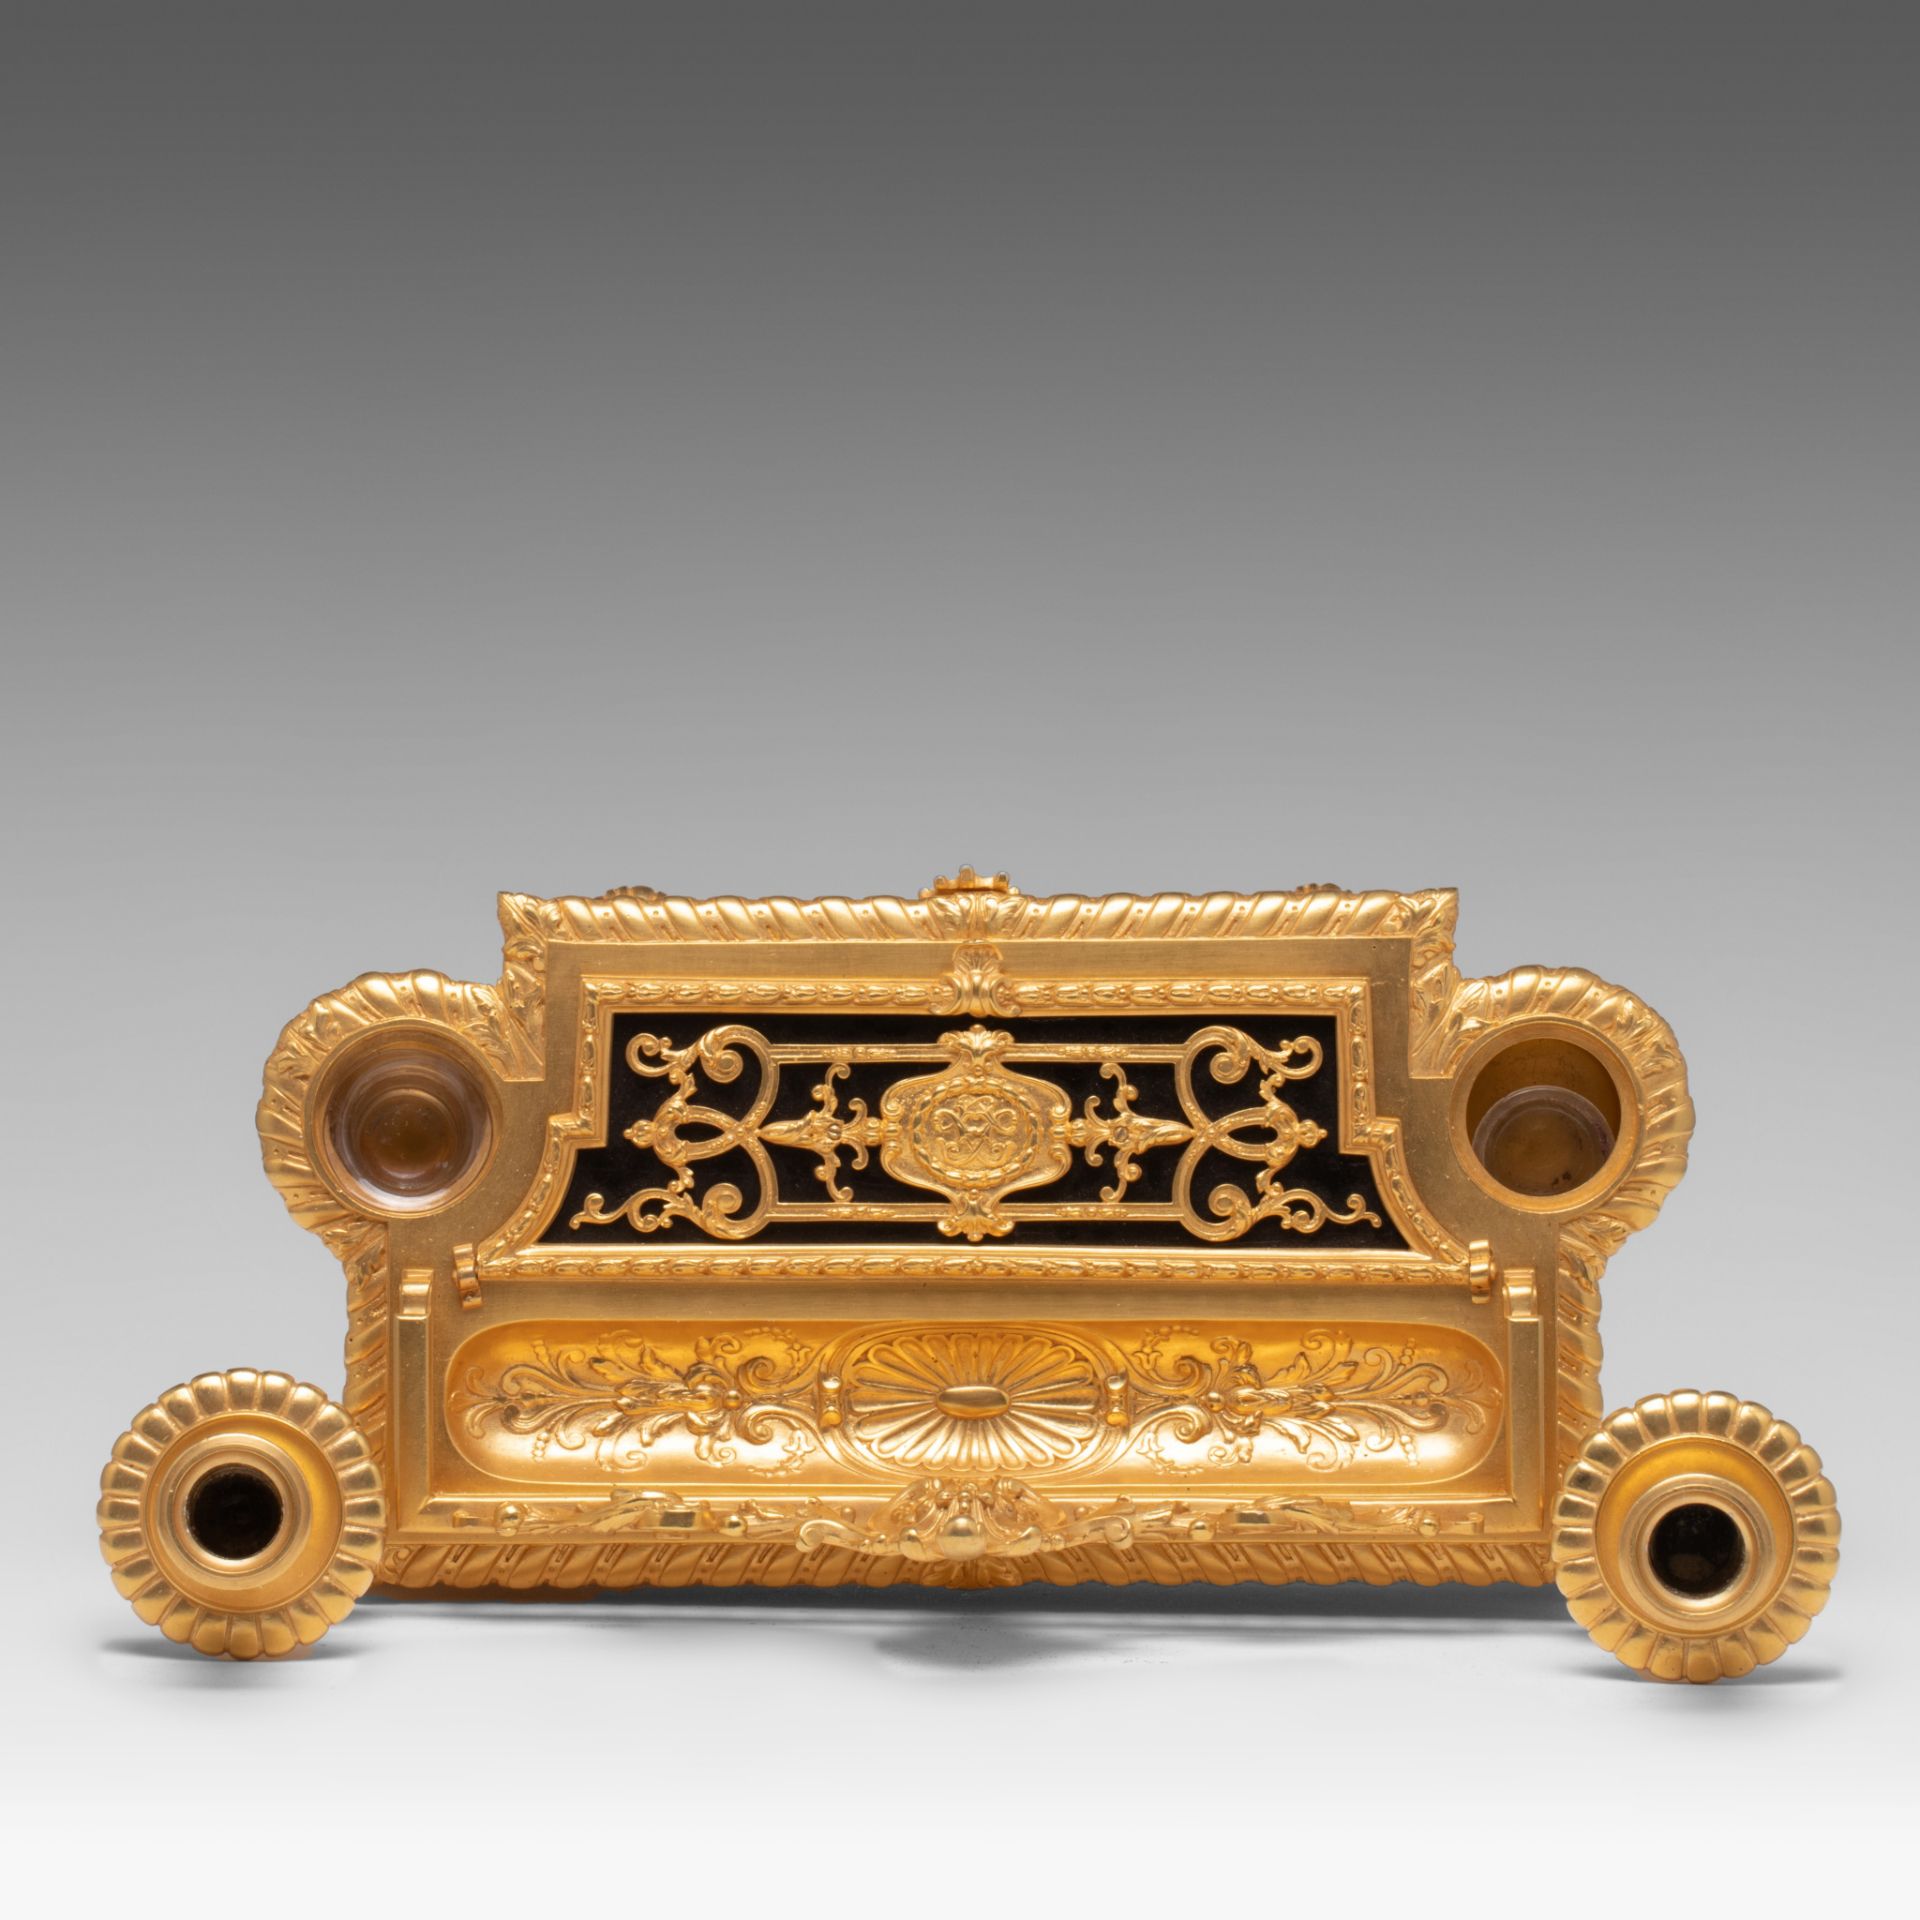 A Neoclassical gilt bronze ink well, H 22 - W 41 cm - Image 7 of 8